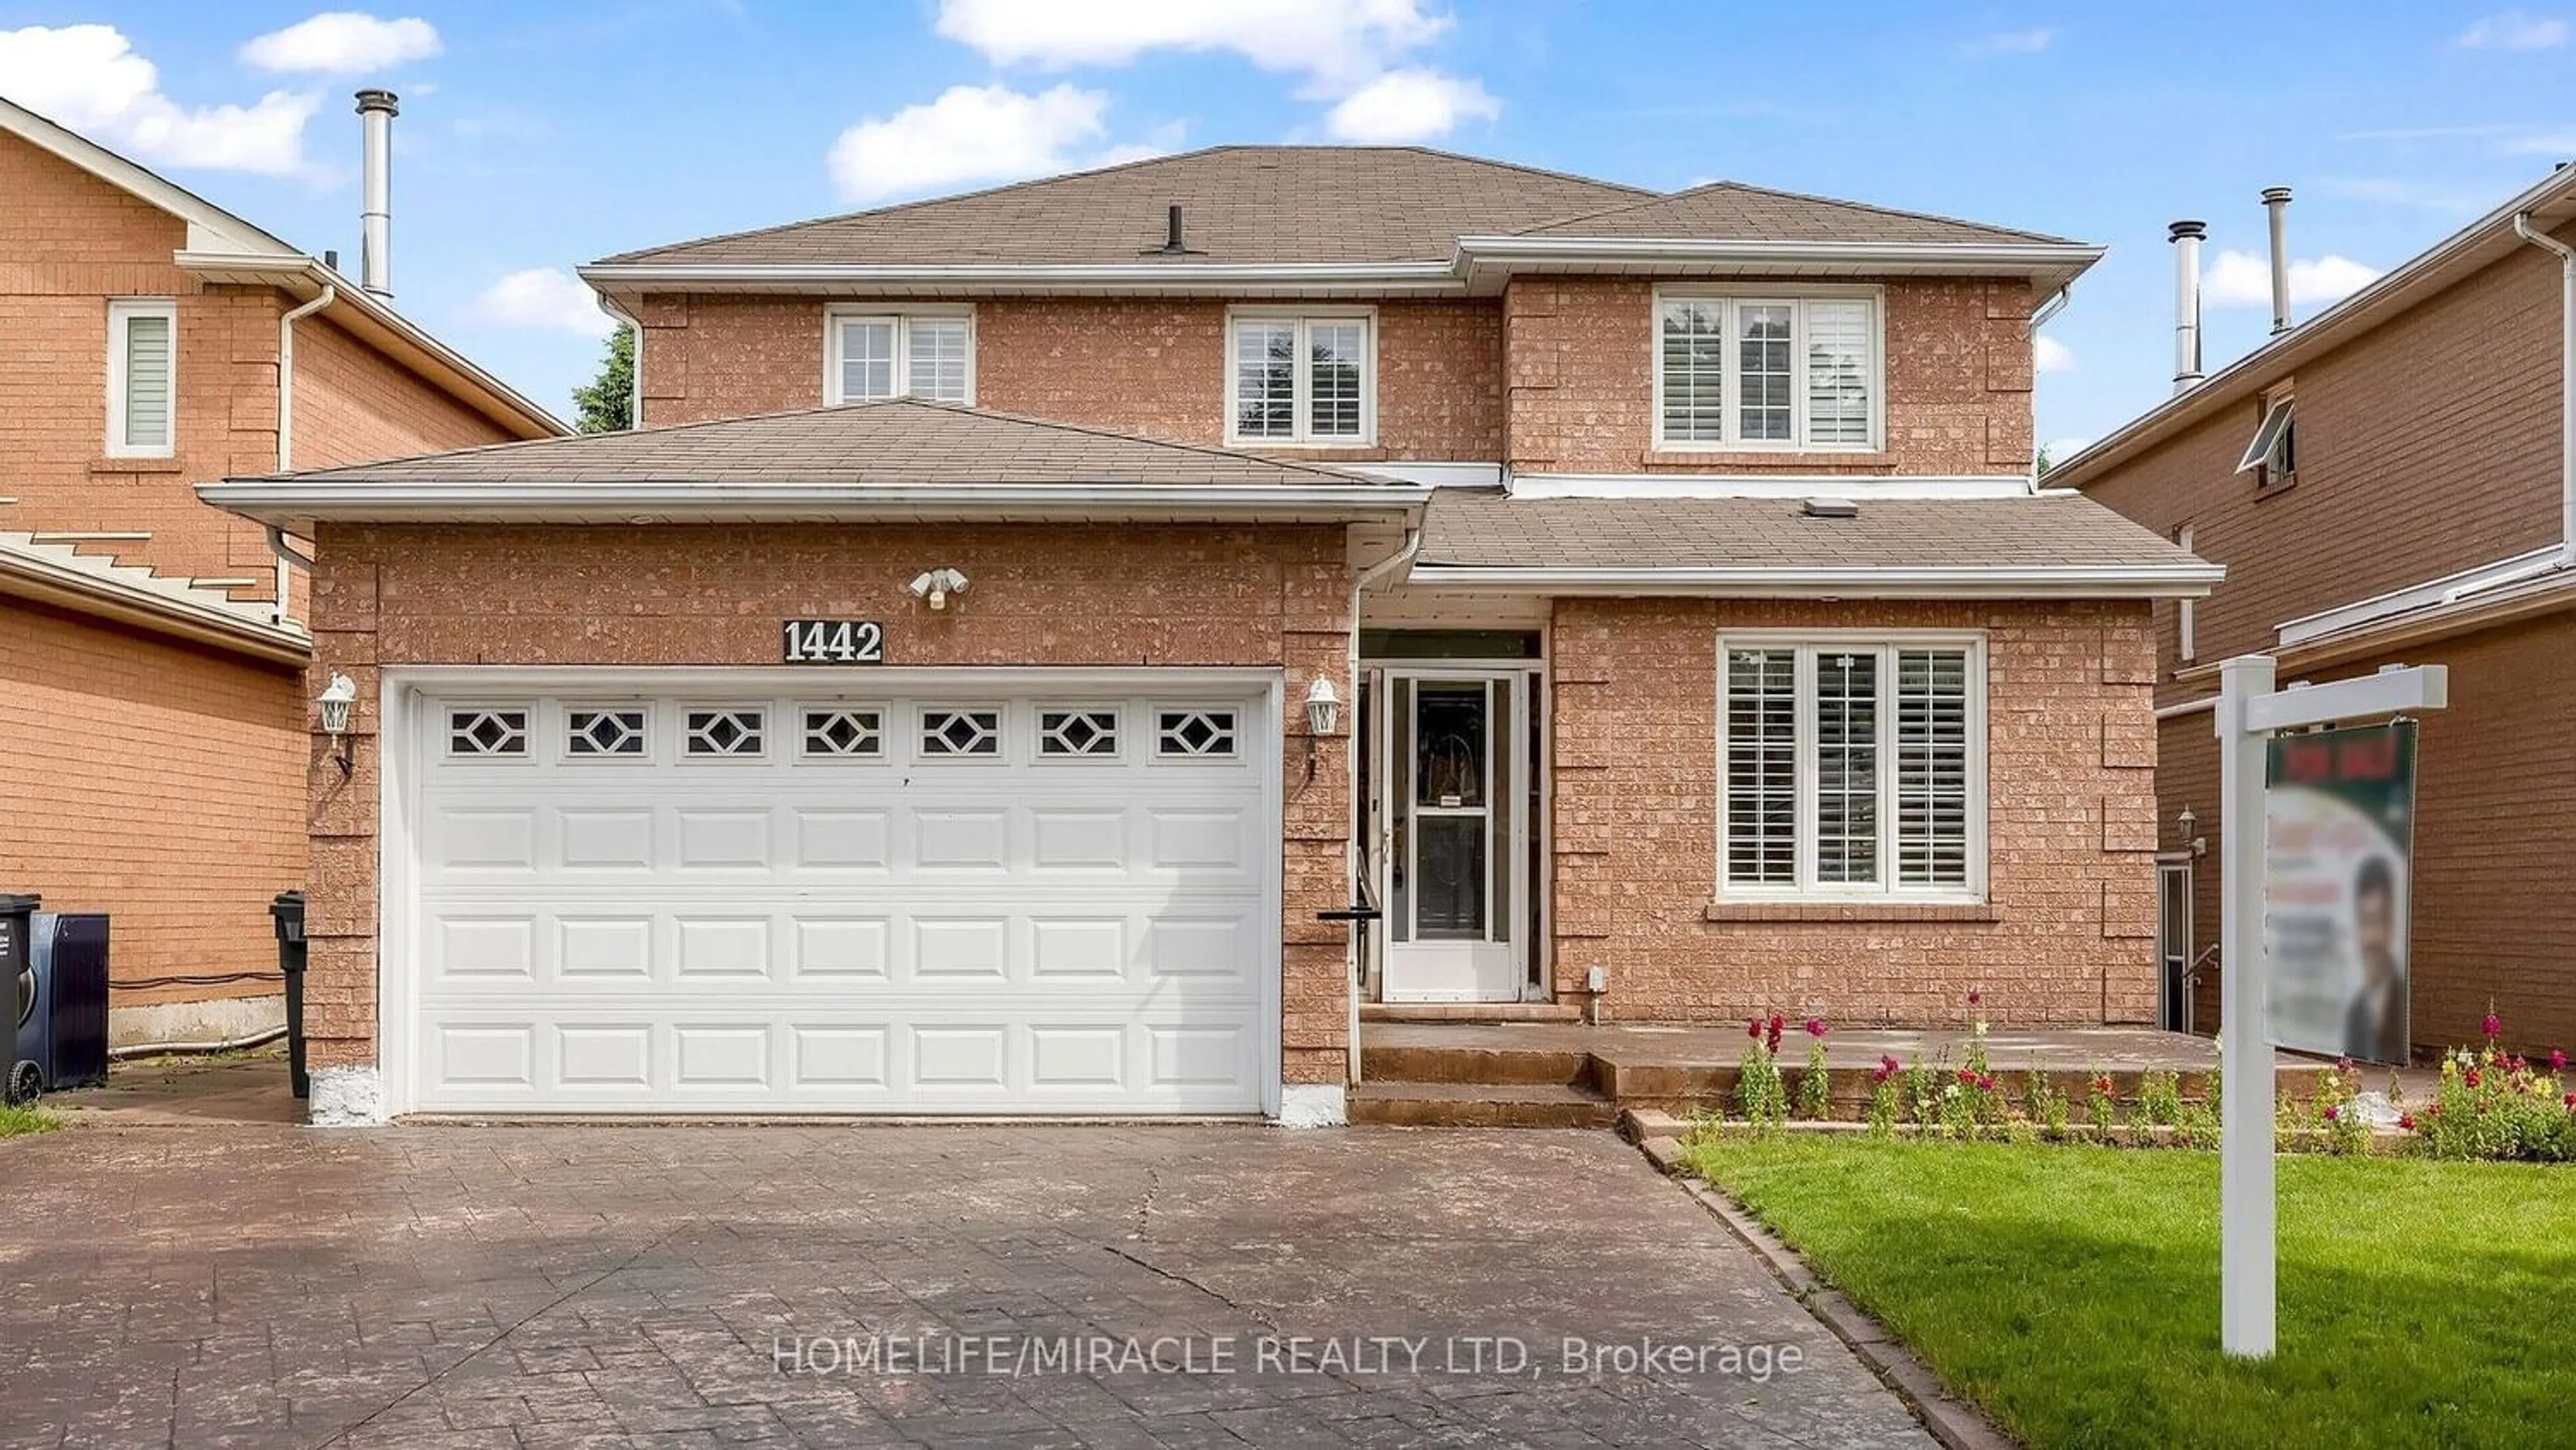 Home with brick exterior material for 1442 Emerson Lane, Mississauga Ontario L5V 1L6